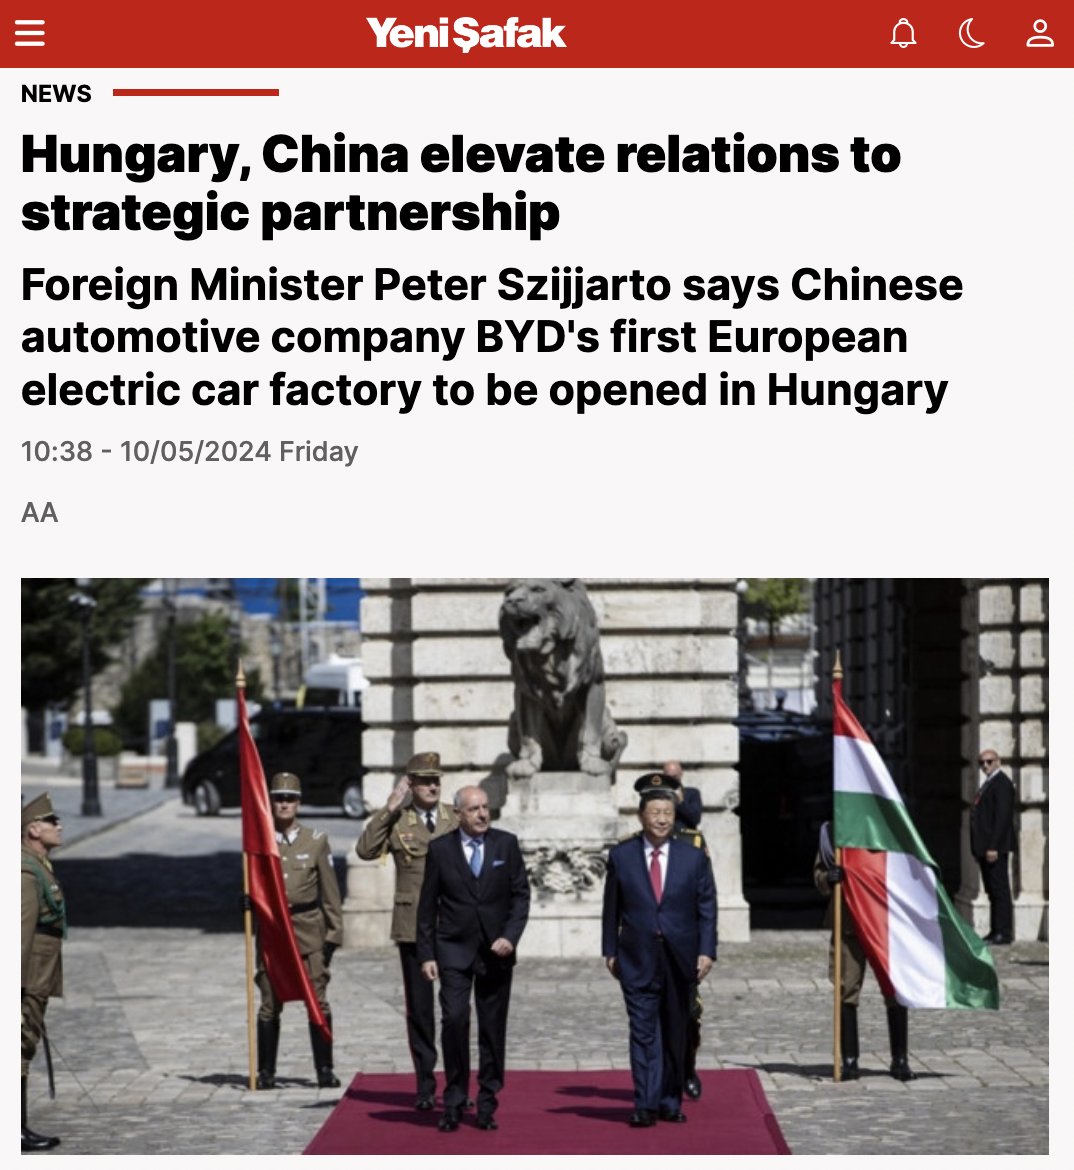 #Hungary as well as #Serbia are forging a more independent path with respect to major powers China and Russia.  

For non-EU citizens who want EU residency but are inclined to a different brand of politics and foreign policy, Hungary will be launching a #GoldenVisa program later